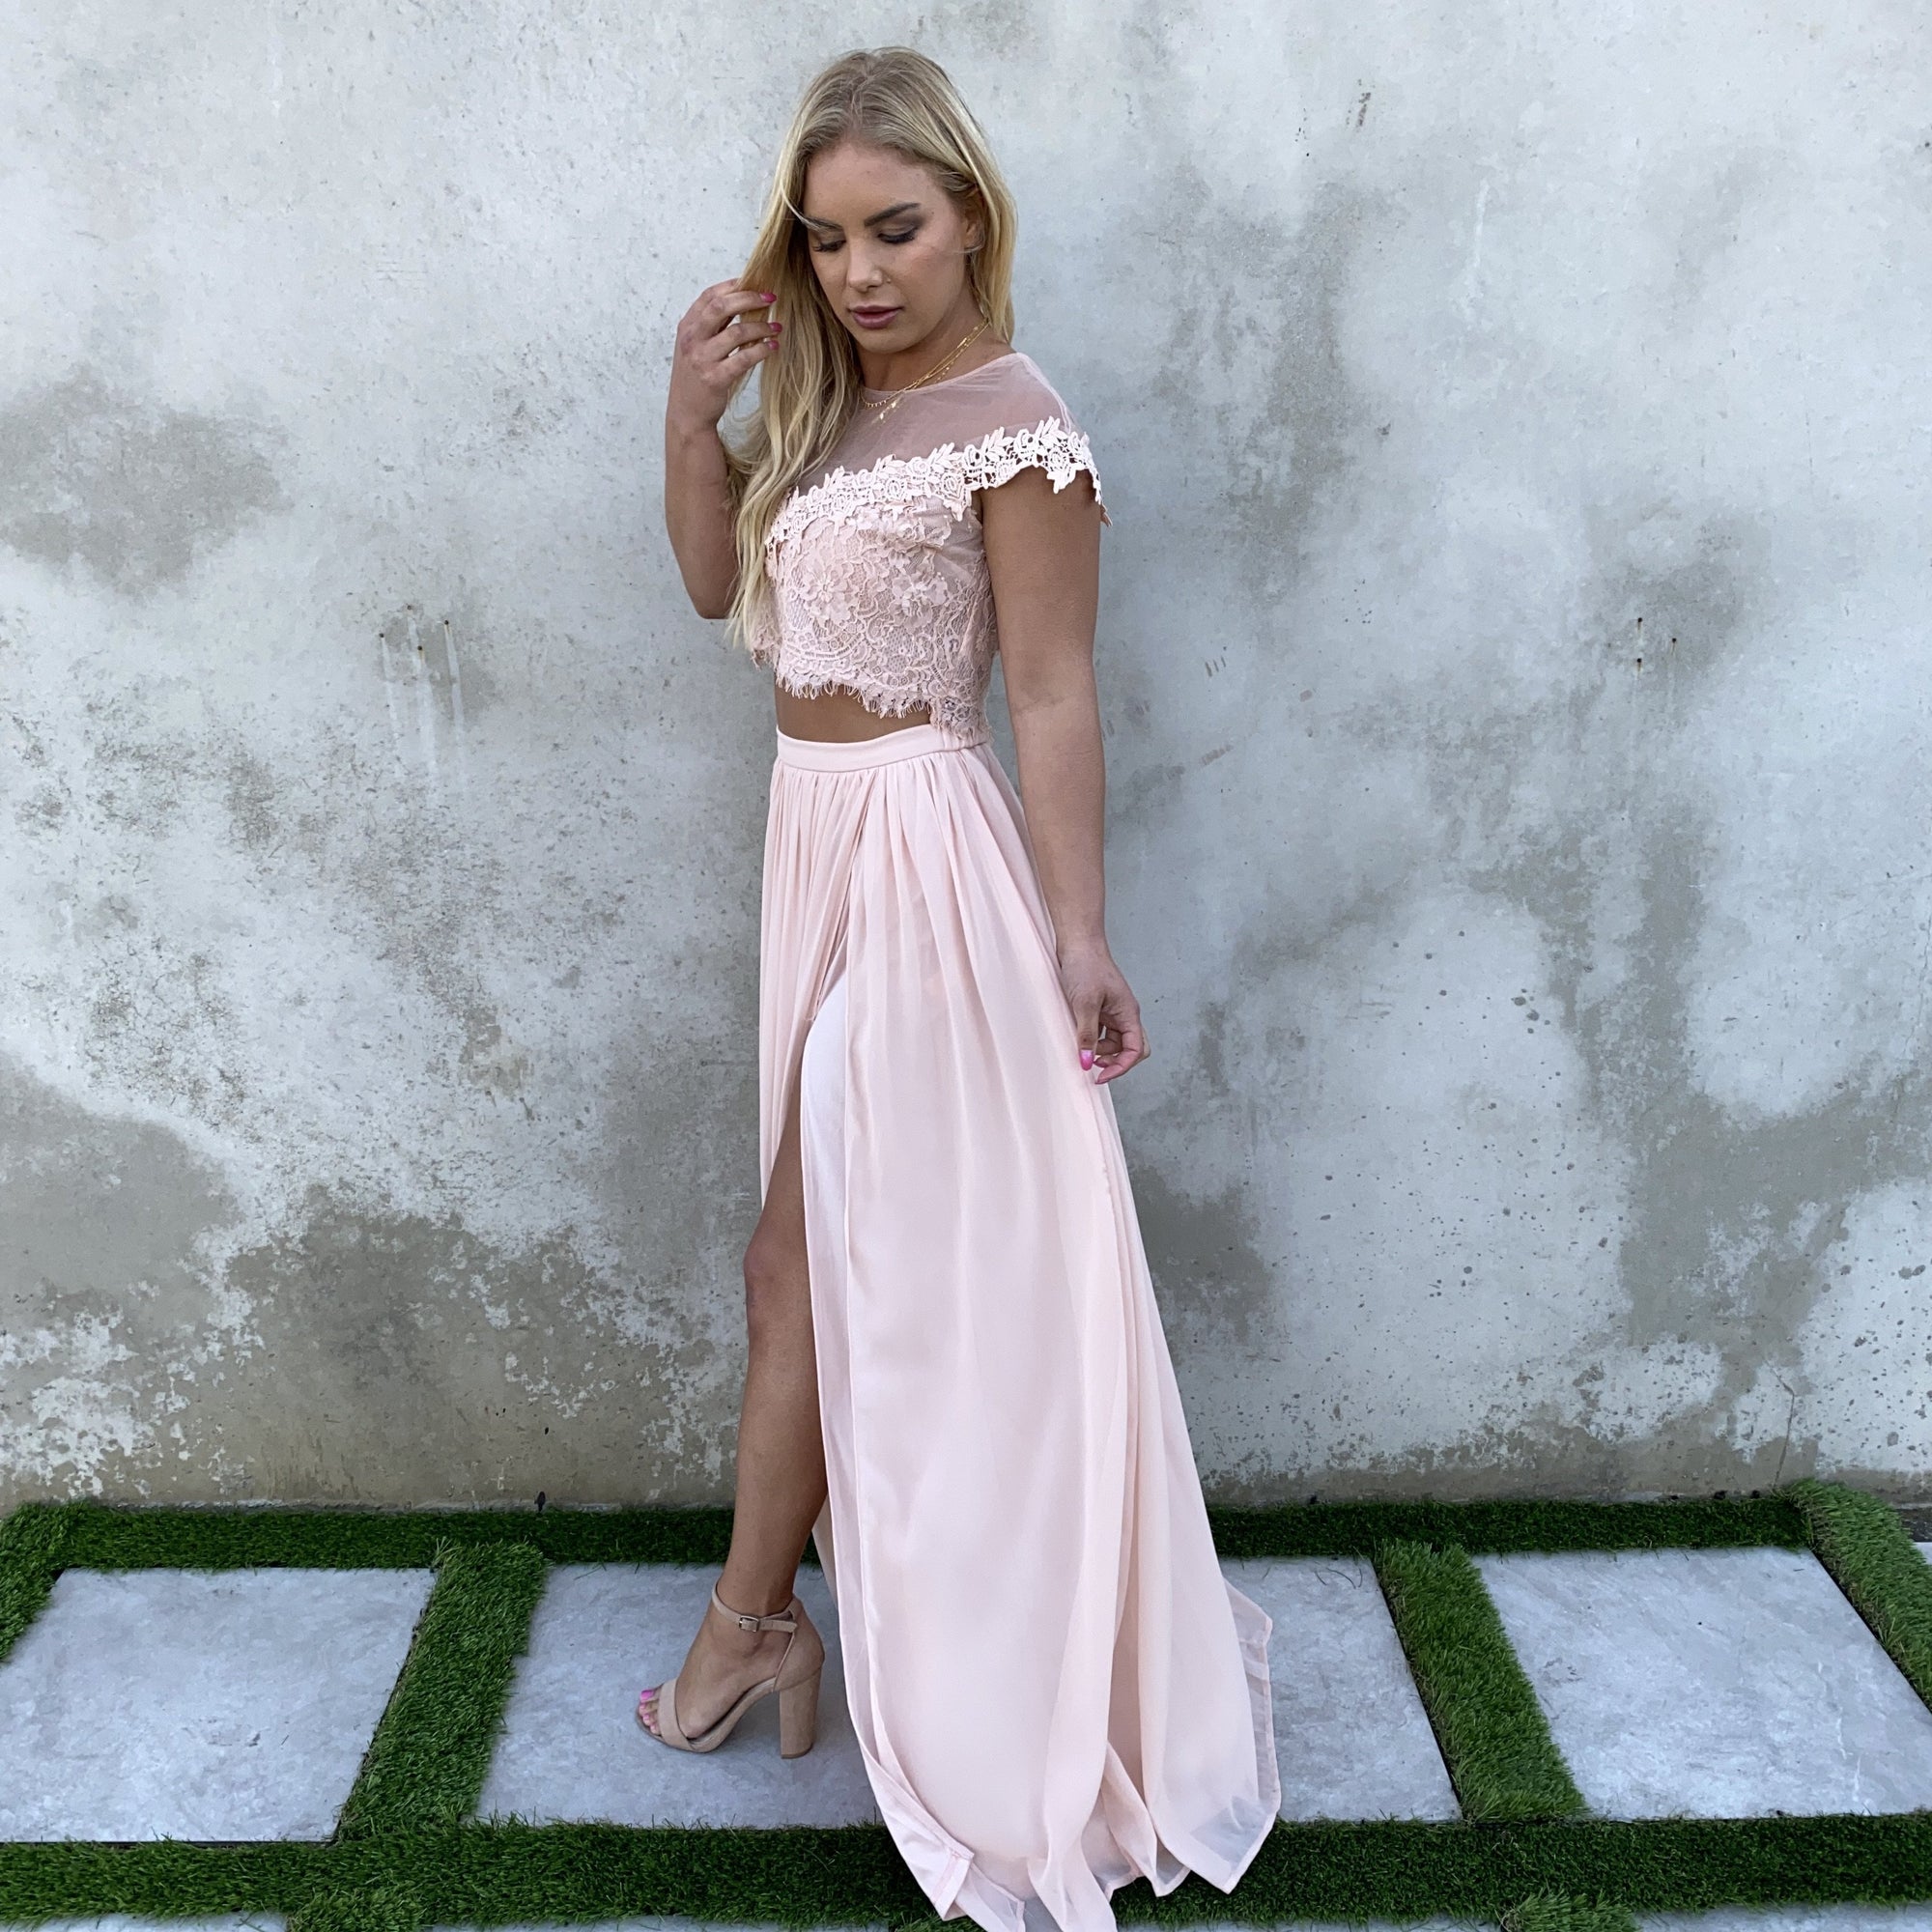 Dance With Me Lace Top & Maxi Skirt Set In Blush Pink - Dainty Hooligan